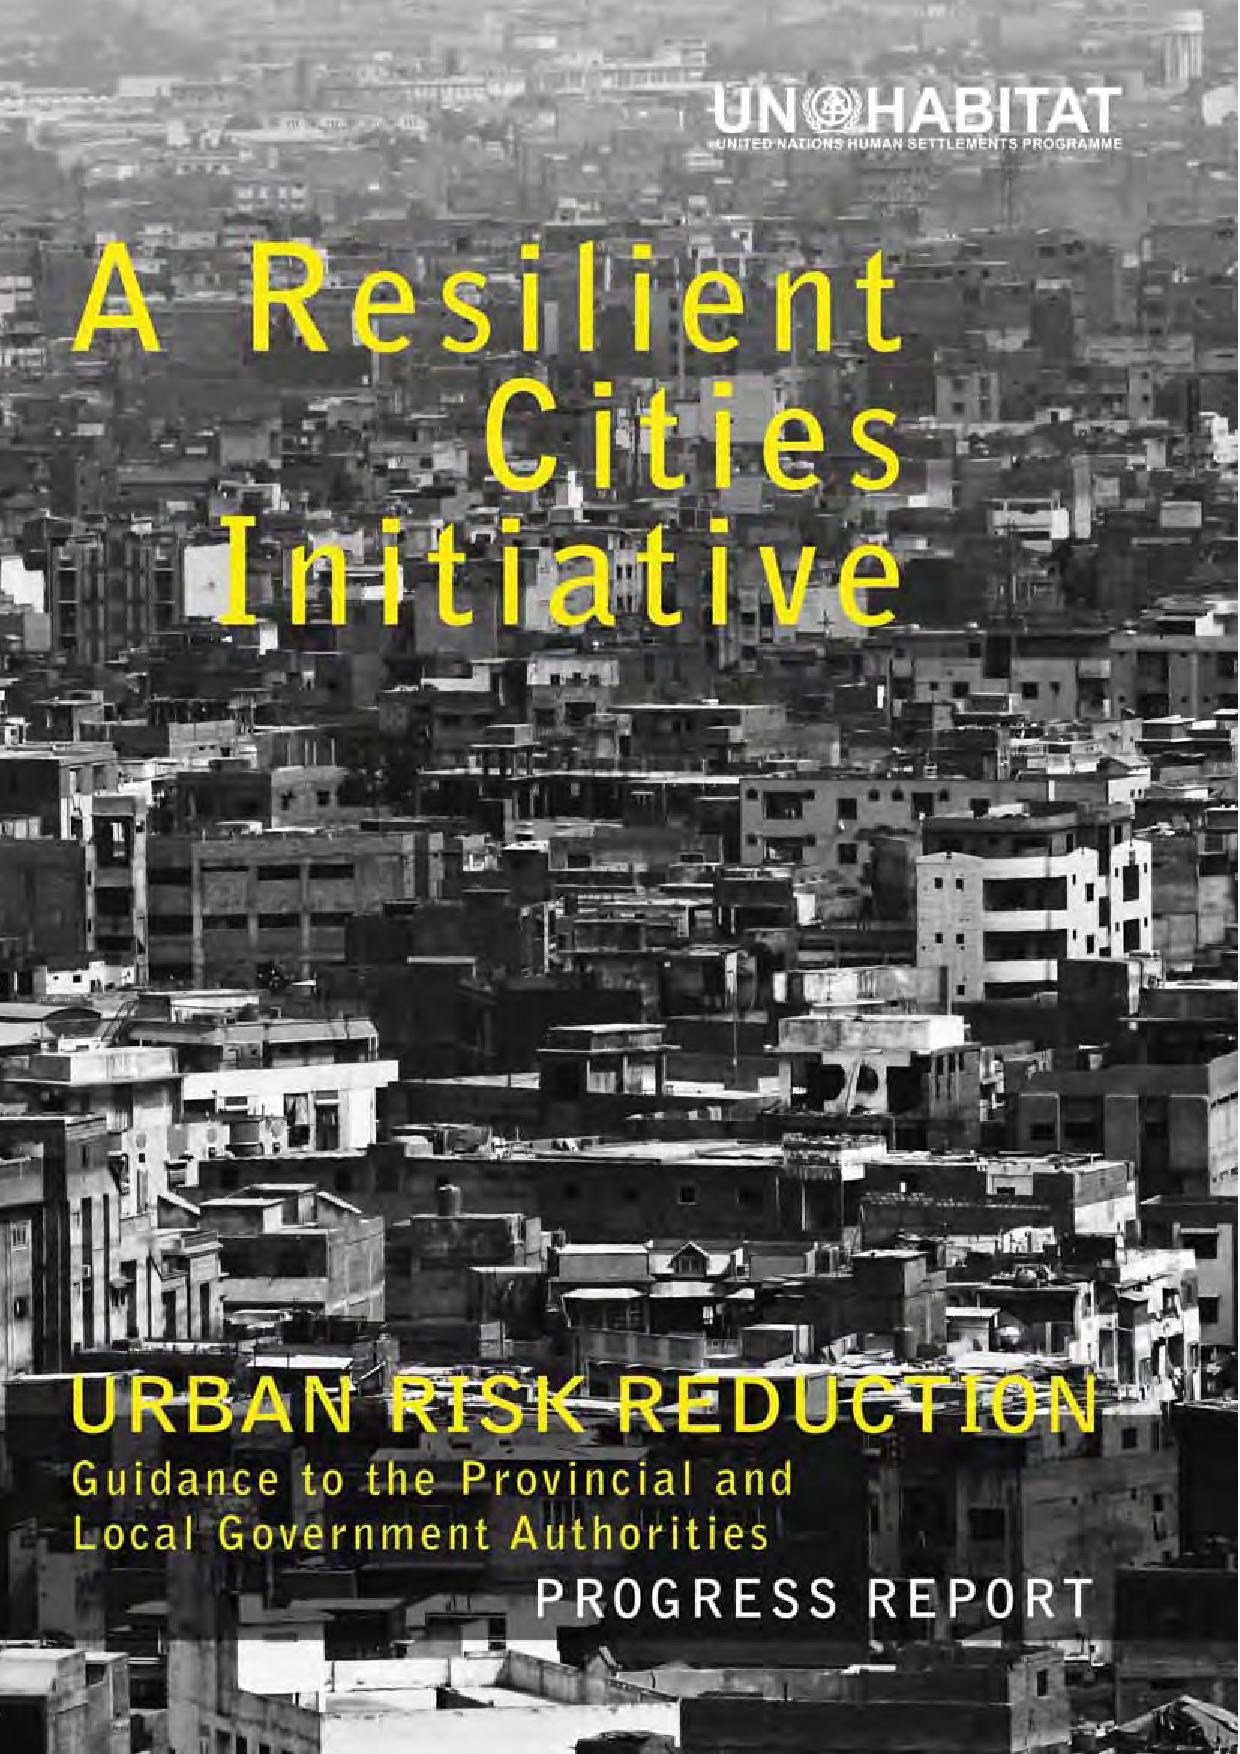 A Resilient Cities Initiatives: Urban Risk Reduction Progress Report (November 2011 – March 2012)